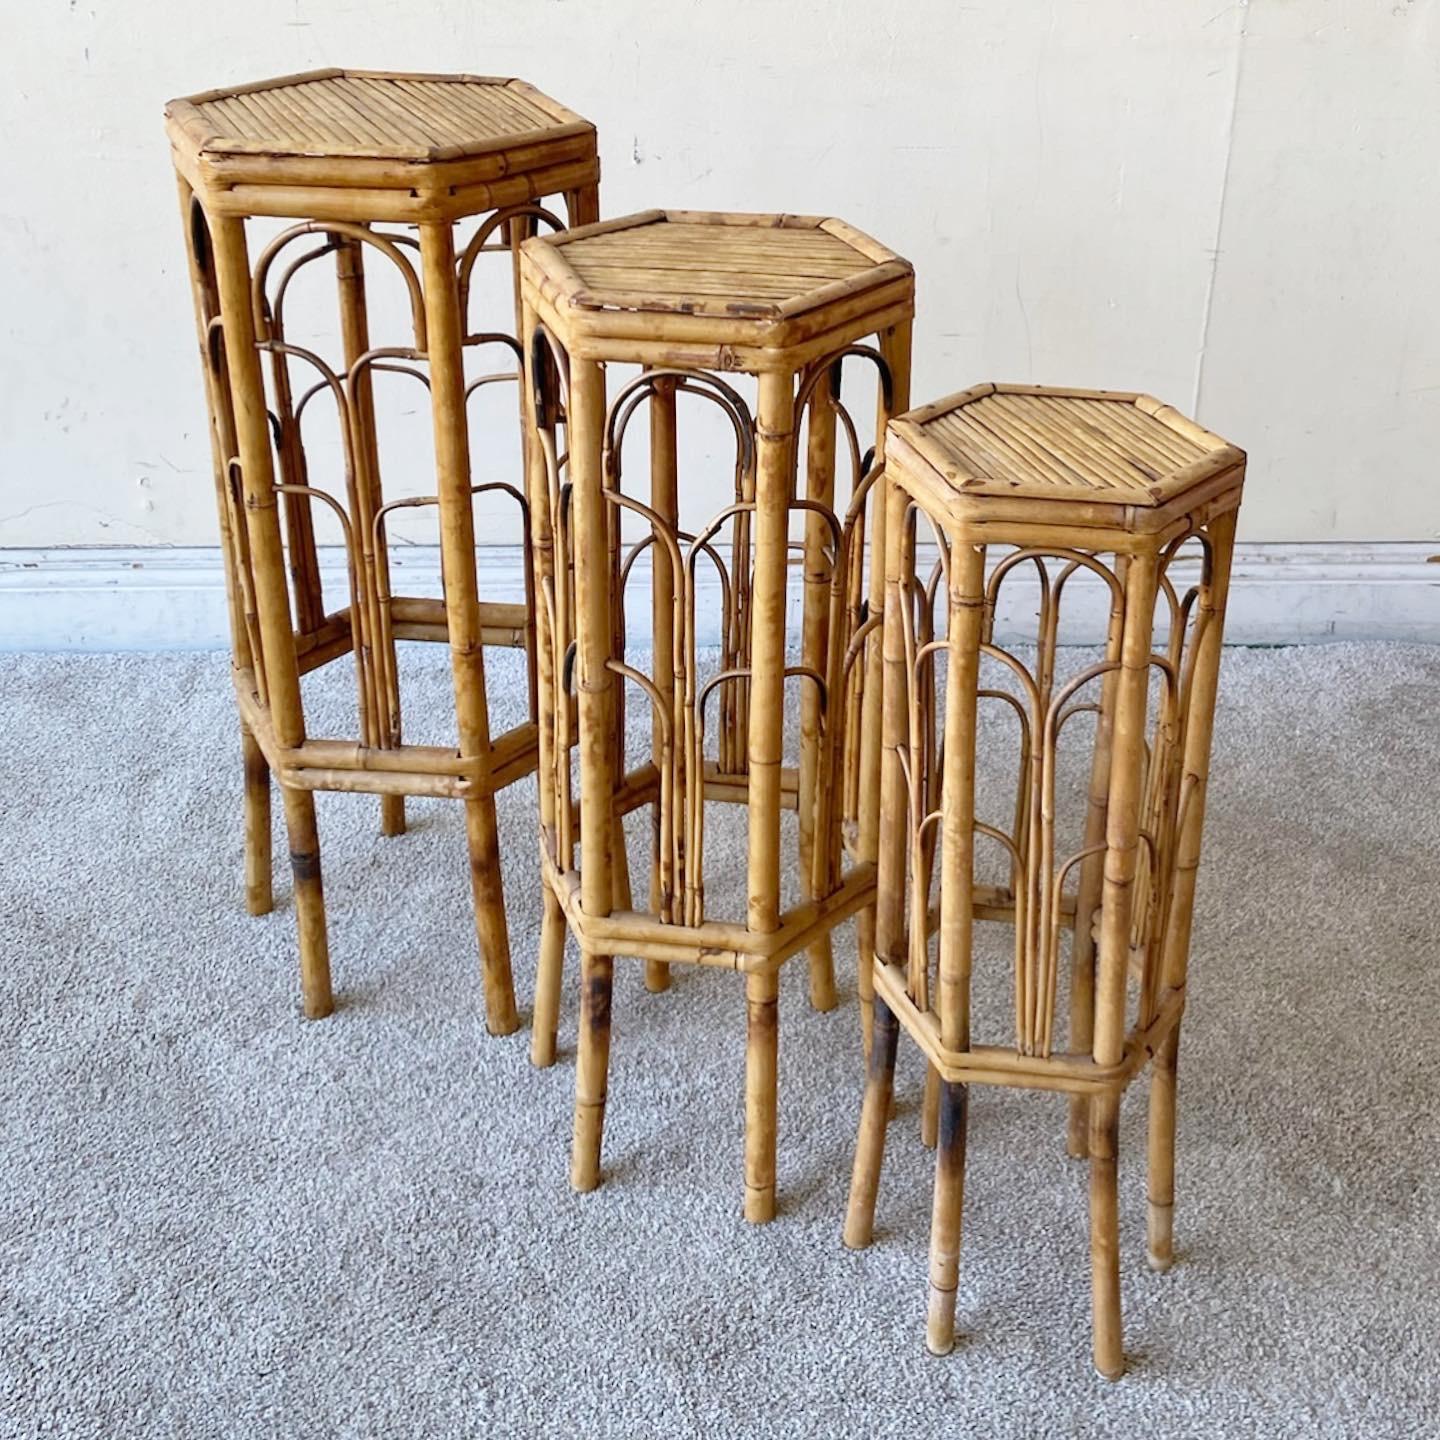 Boho Chic Hexagonal Tortoise Shell Bamboo Nesting Pedestals In Good Condition For Sale In Delray Beach, FL